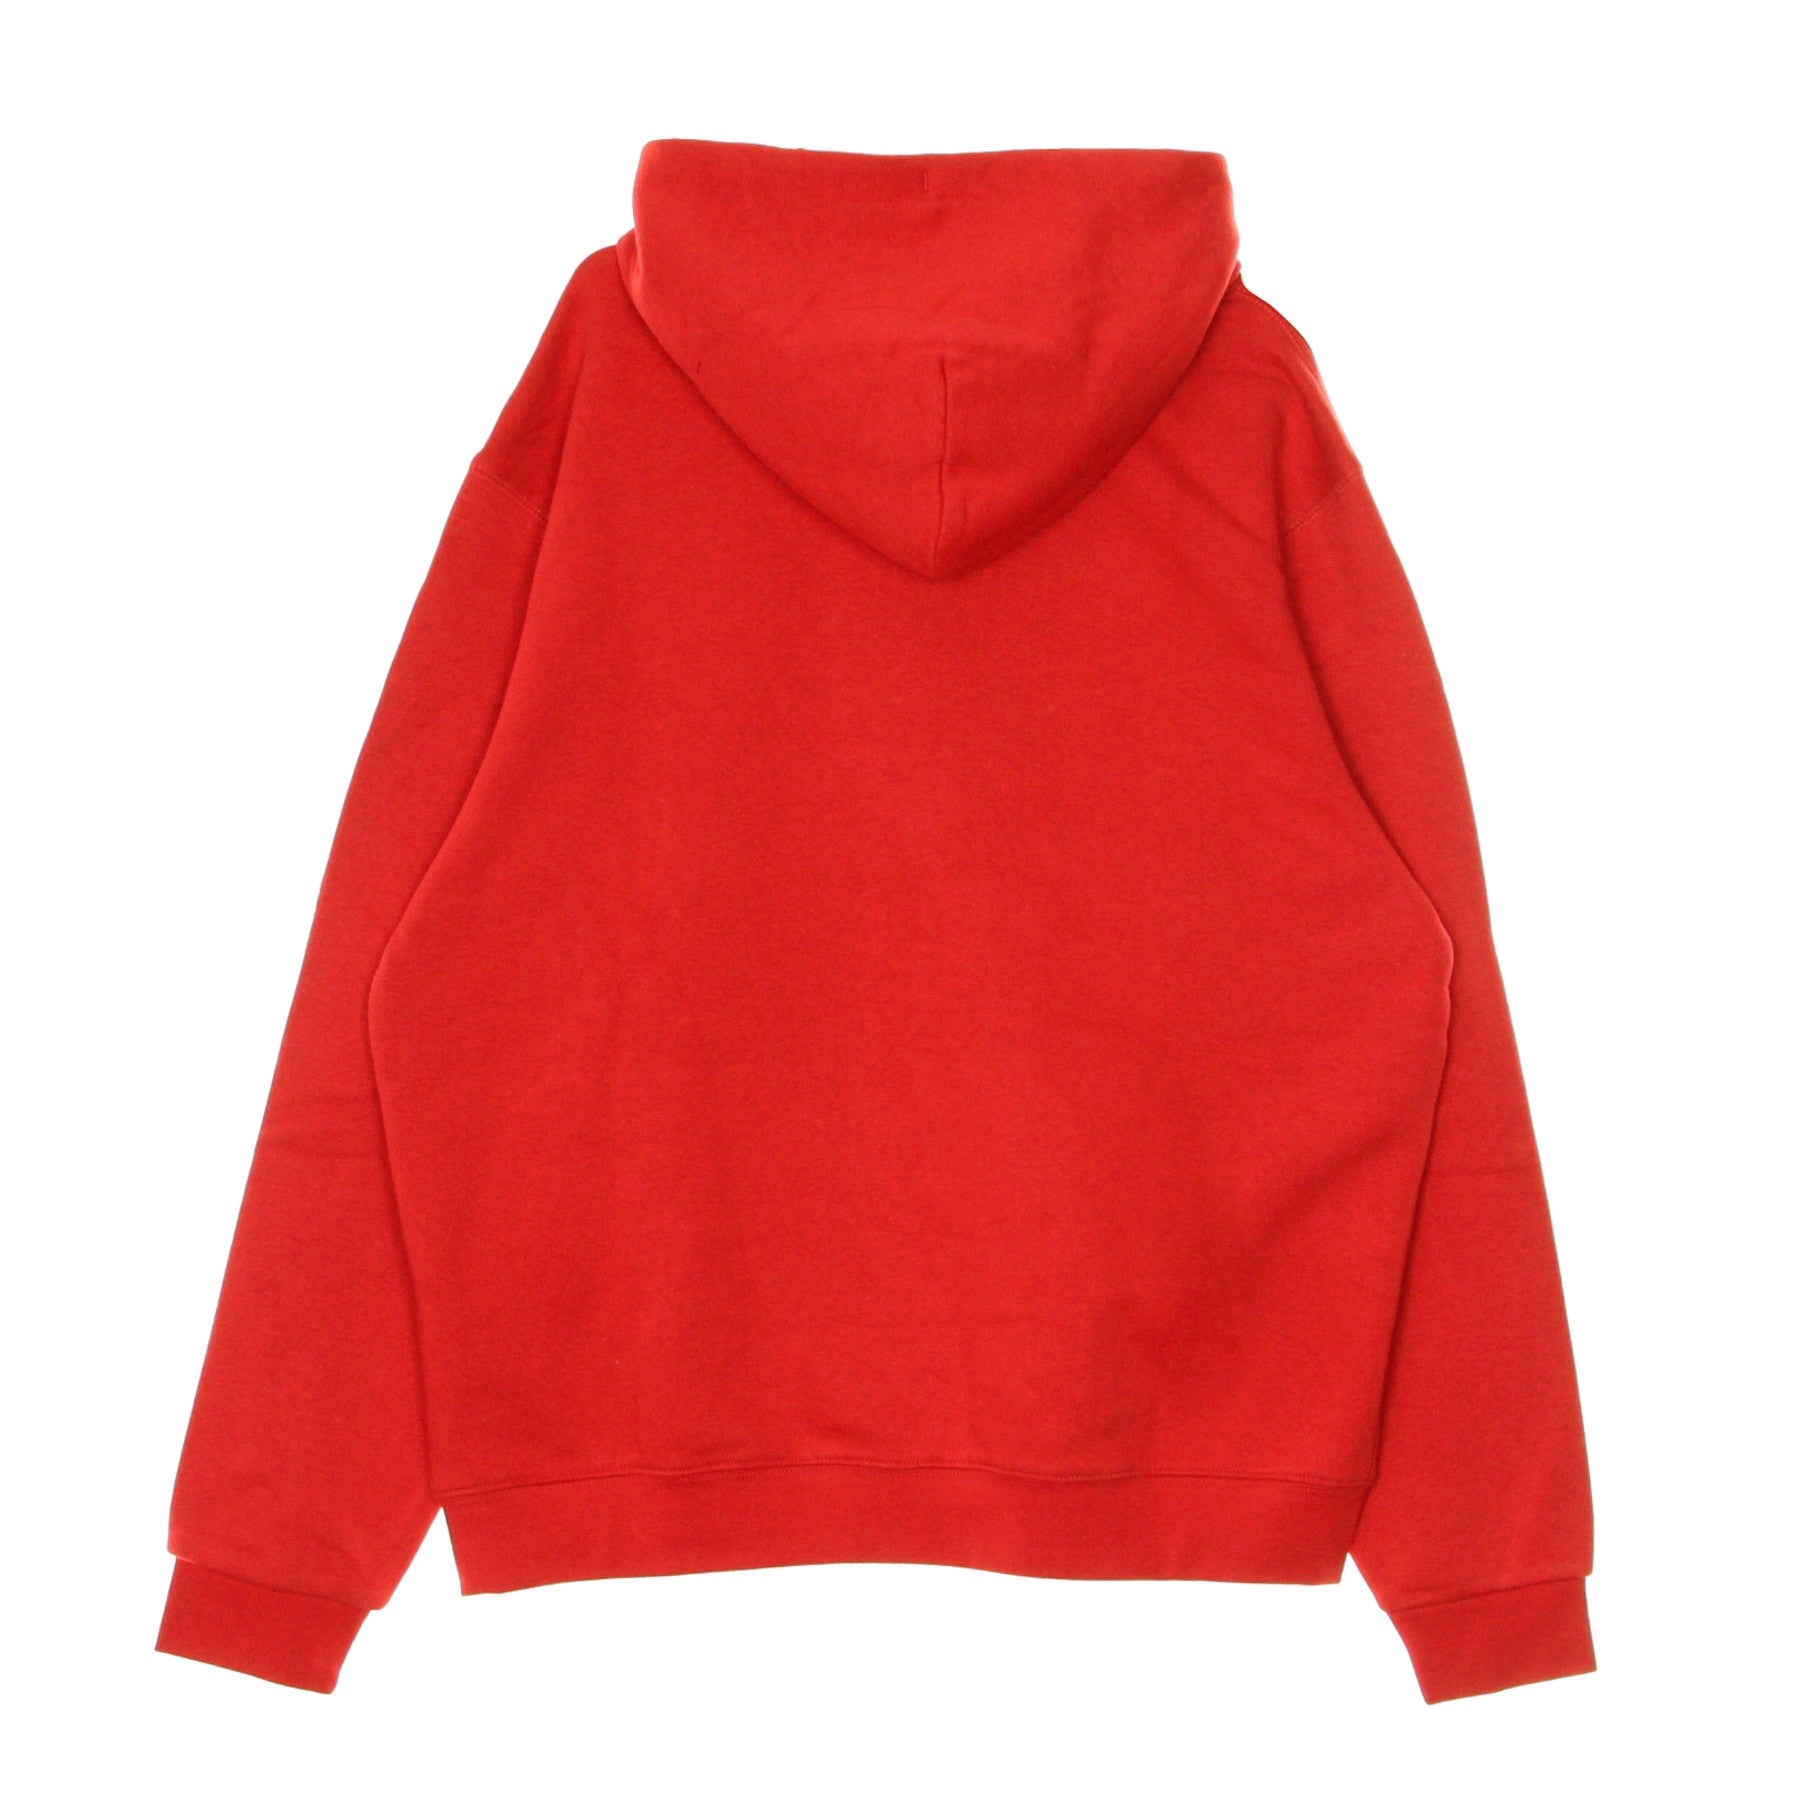 About2 Men's Hoodie